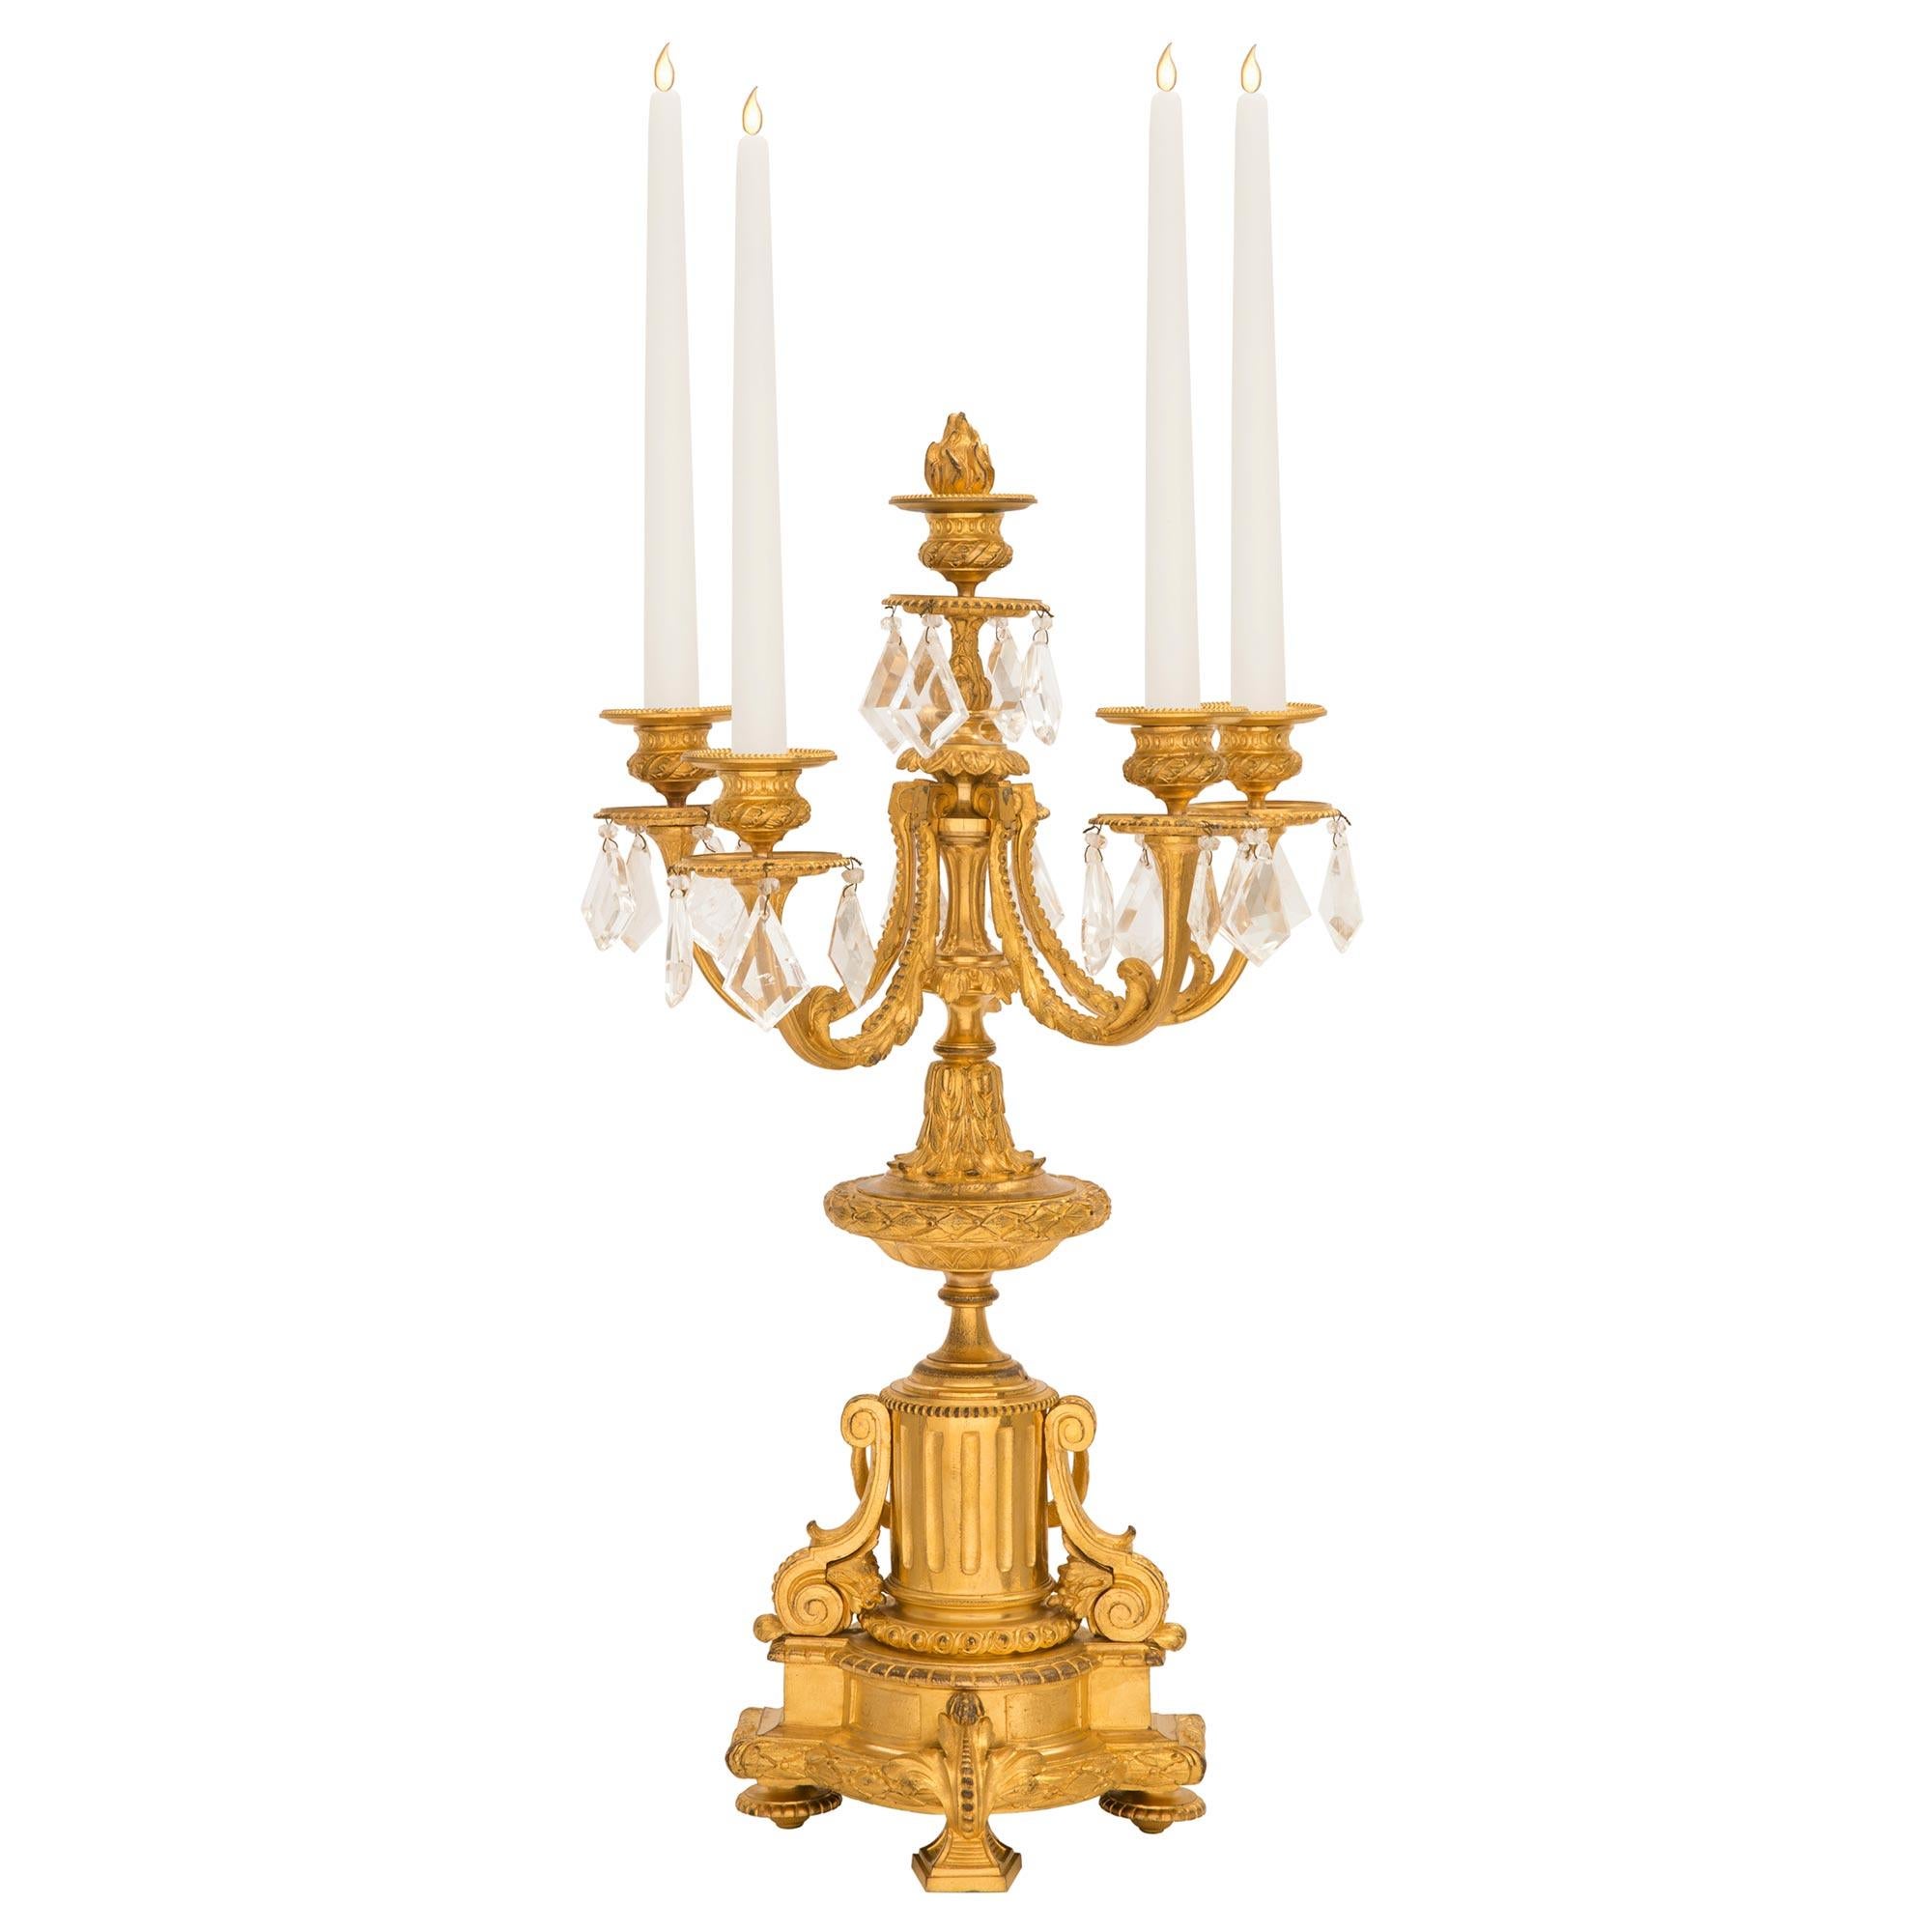 An exquisite pair of French mid 19th century Louis XVI st. ormolu and rock crystal candelabras. Each beautiful six arm candelabra is raised by a fine elegantly curved foliate support at the front with elegant topie shaped feet at each side. A finely